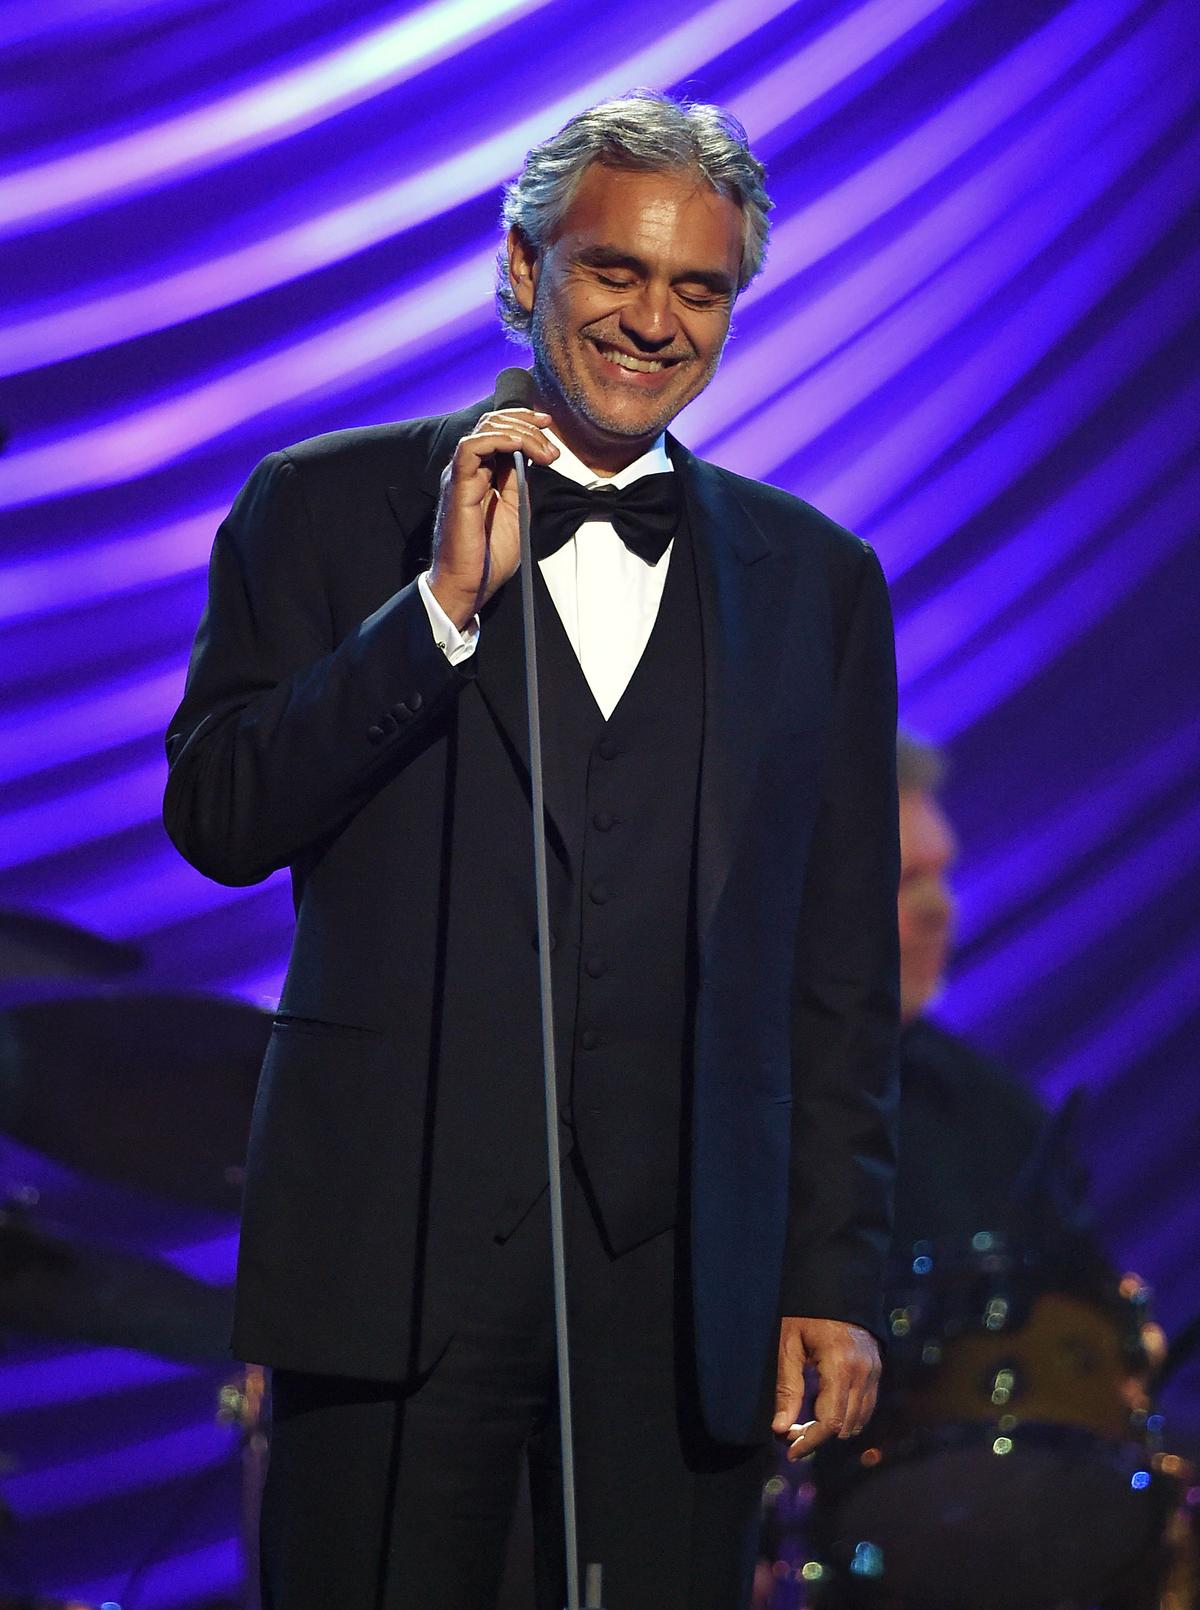 Bocelli performs during the 19th annual Keep Memory Alive "Power of Love Gala" benefit at MGM Grand Garden Arena in Las Vegas, Nevada, on June 13, 2015. (©Getty Images | <a href="https://www.gettyimages.com/detail/news-photo/honoree-andrea-bocelli-performs-during-the-19th-annual-keep-news-photo/477132322?adppopup=true">Ethan Miller</a>)